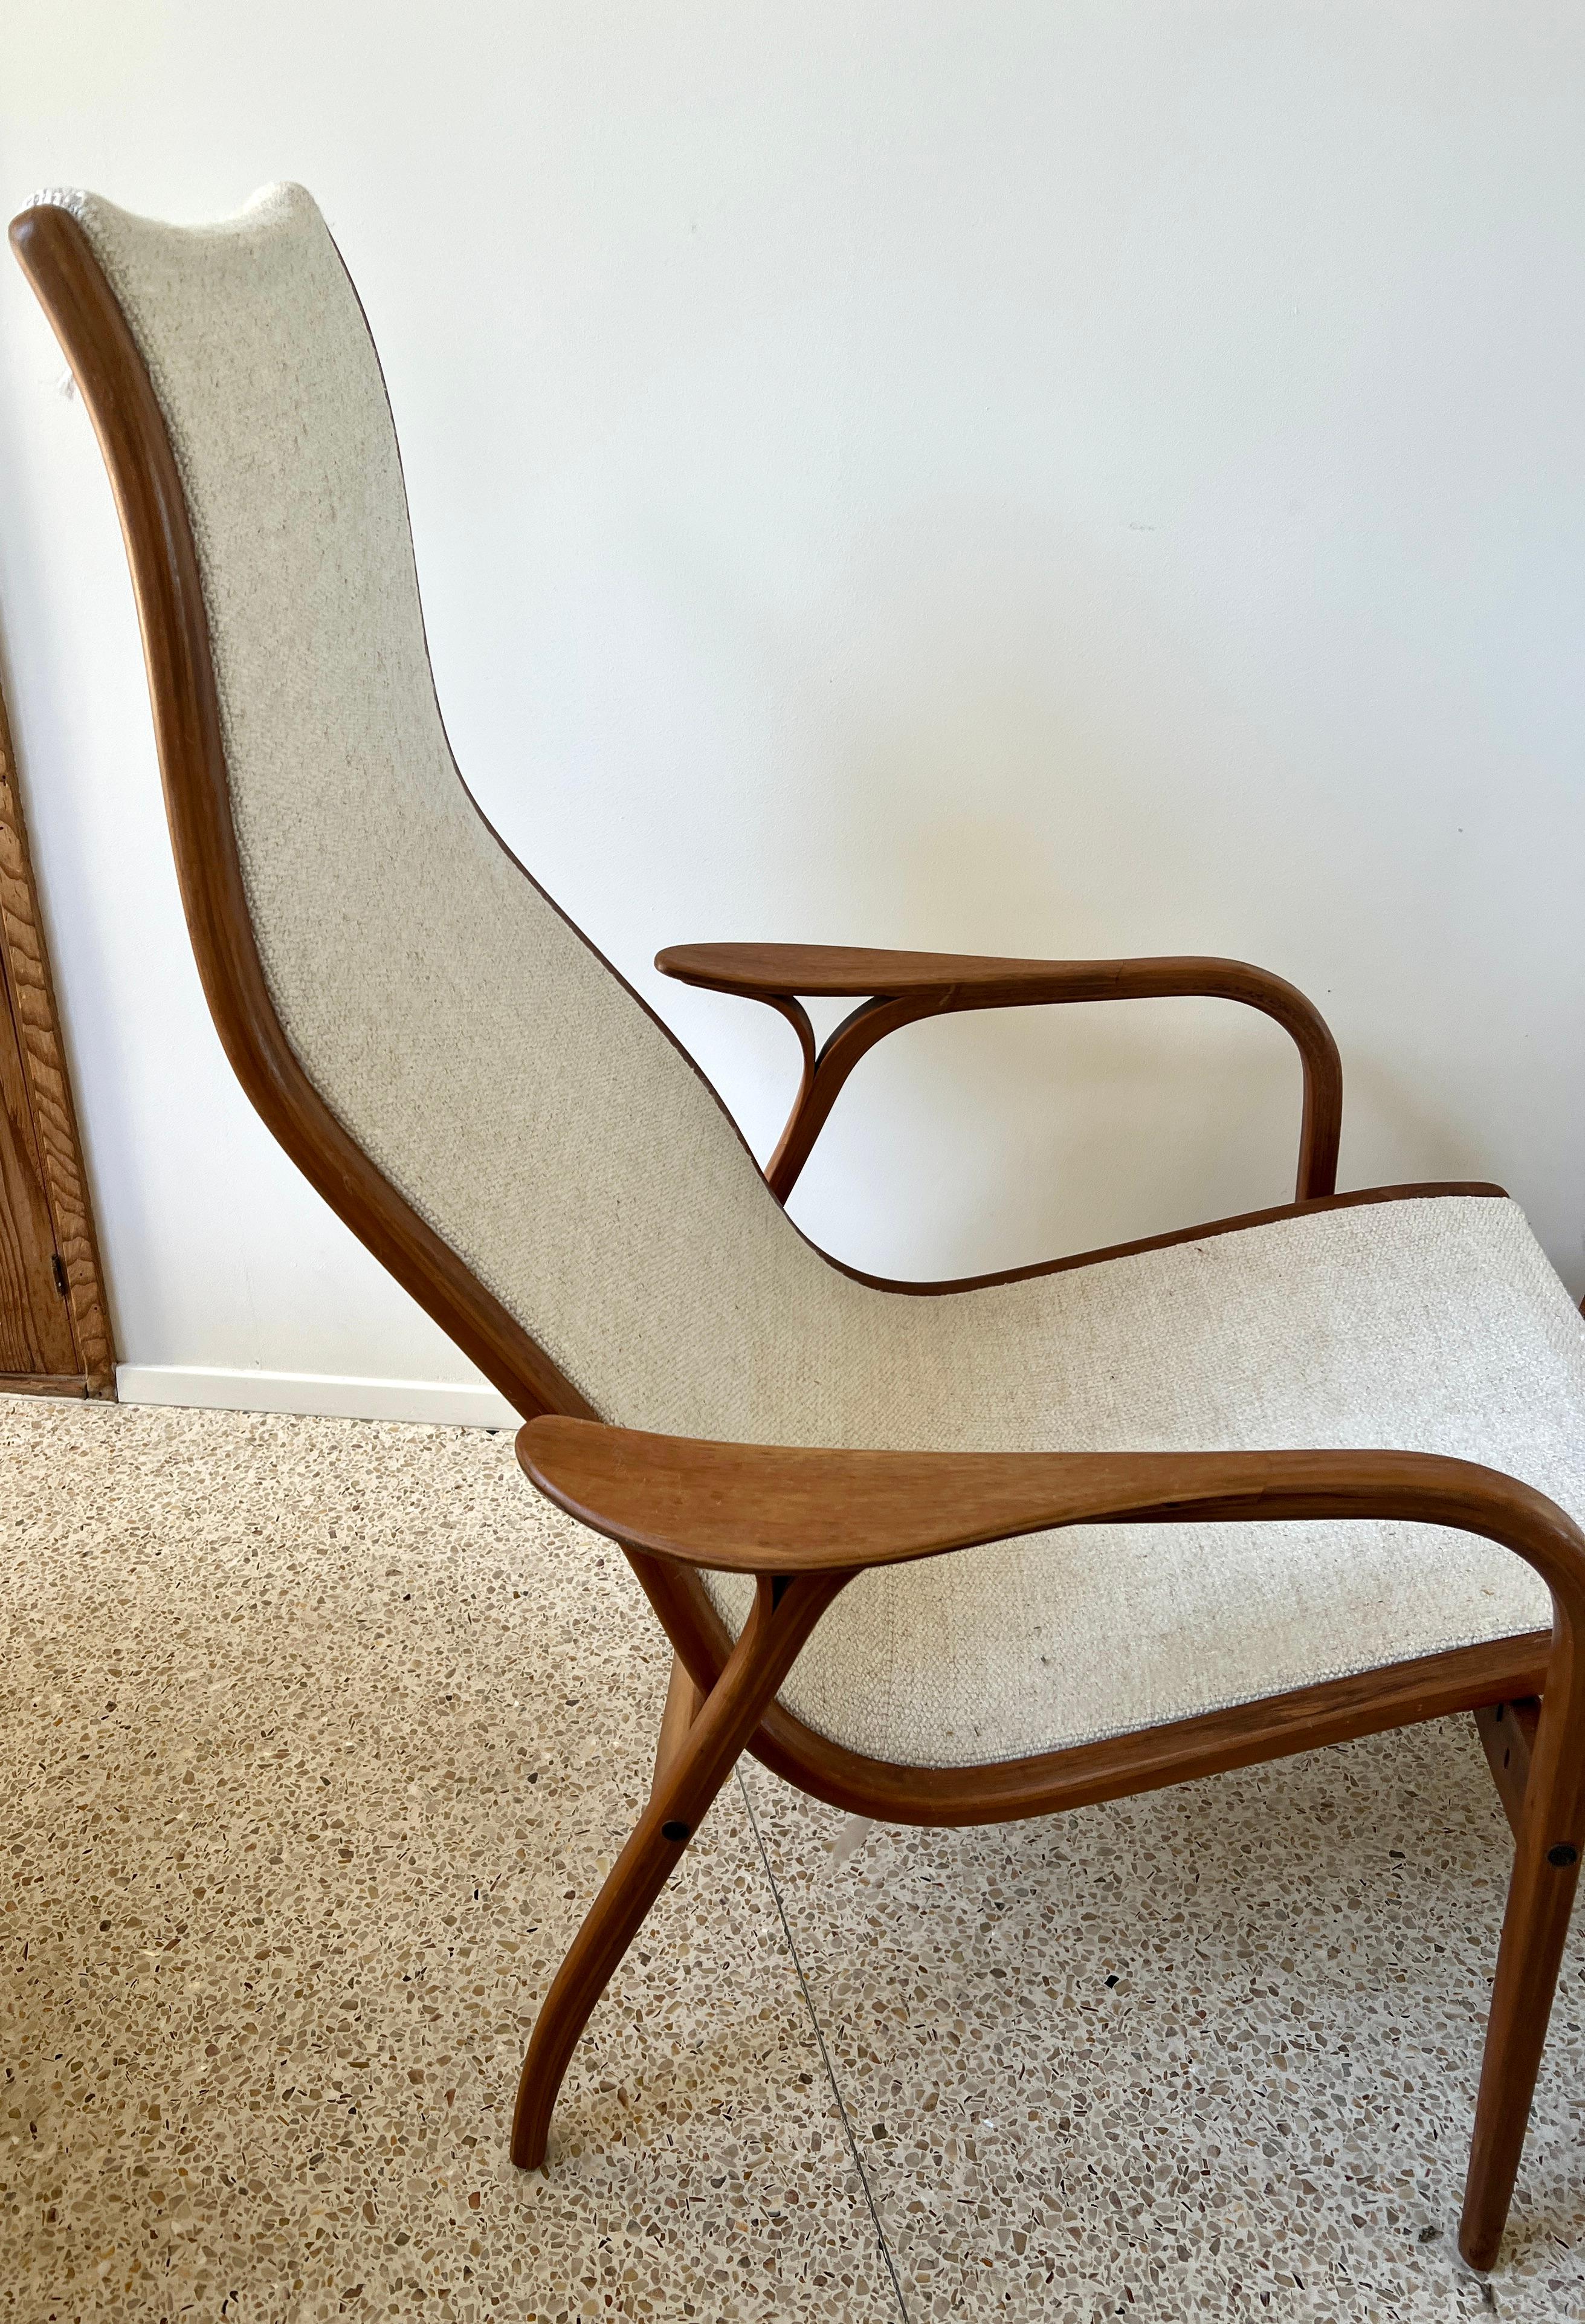 Hand-Crafted Yngve Ekström Lamino Armchair with Stool / Ottoman for Swedese Circa 1950 For Sale